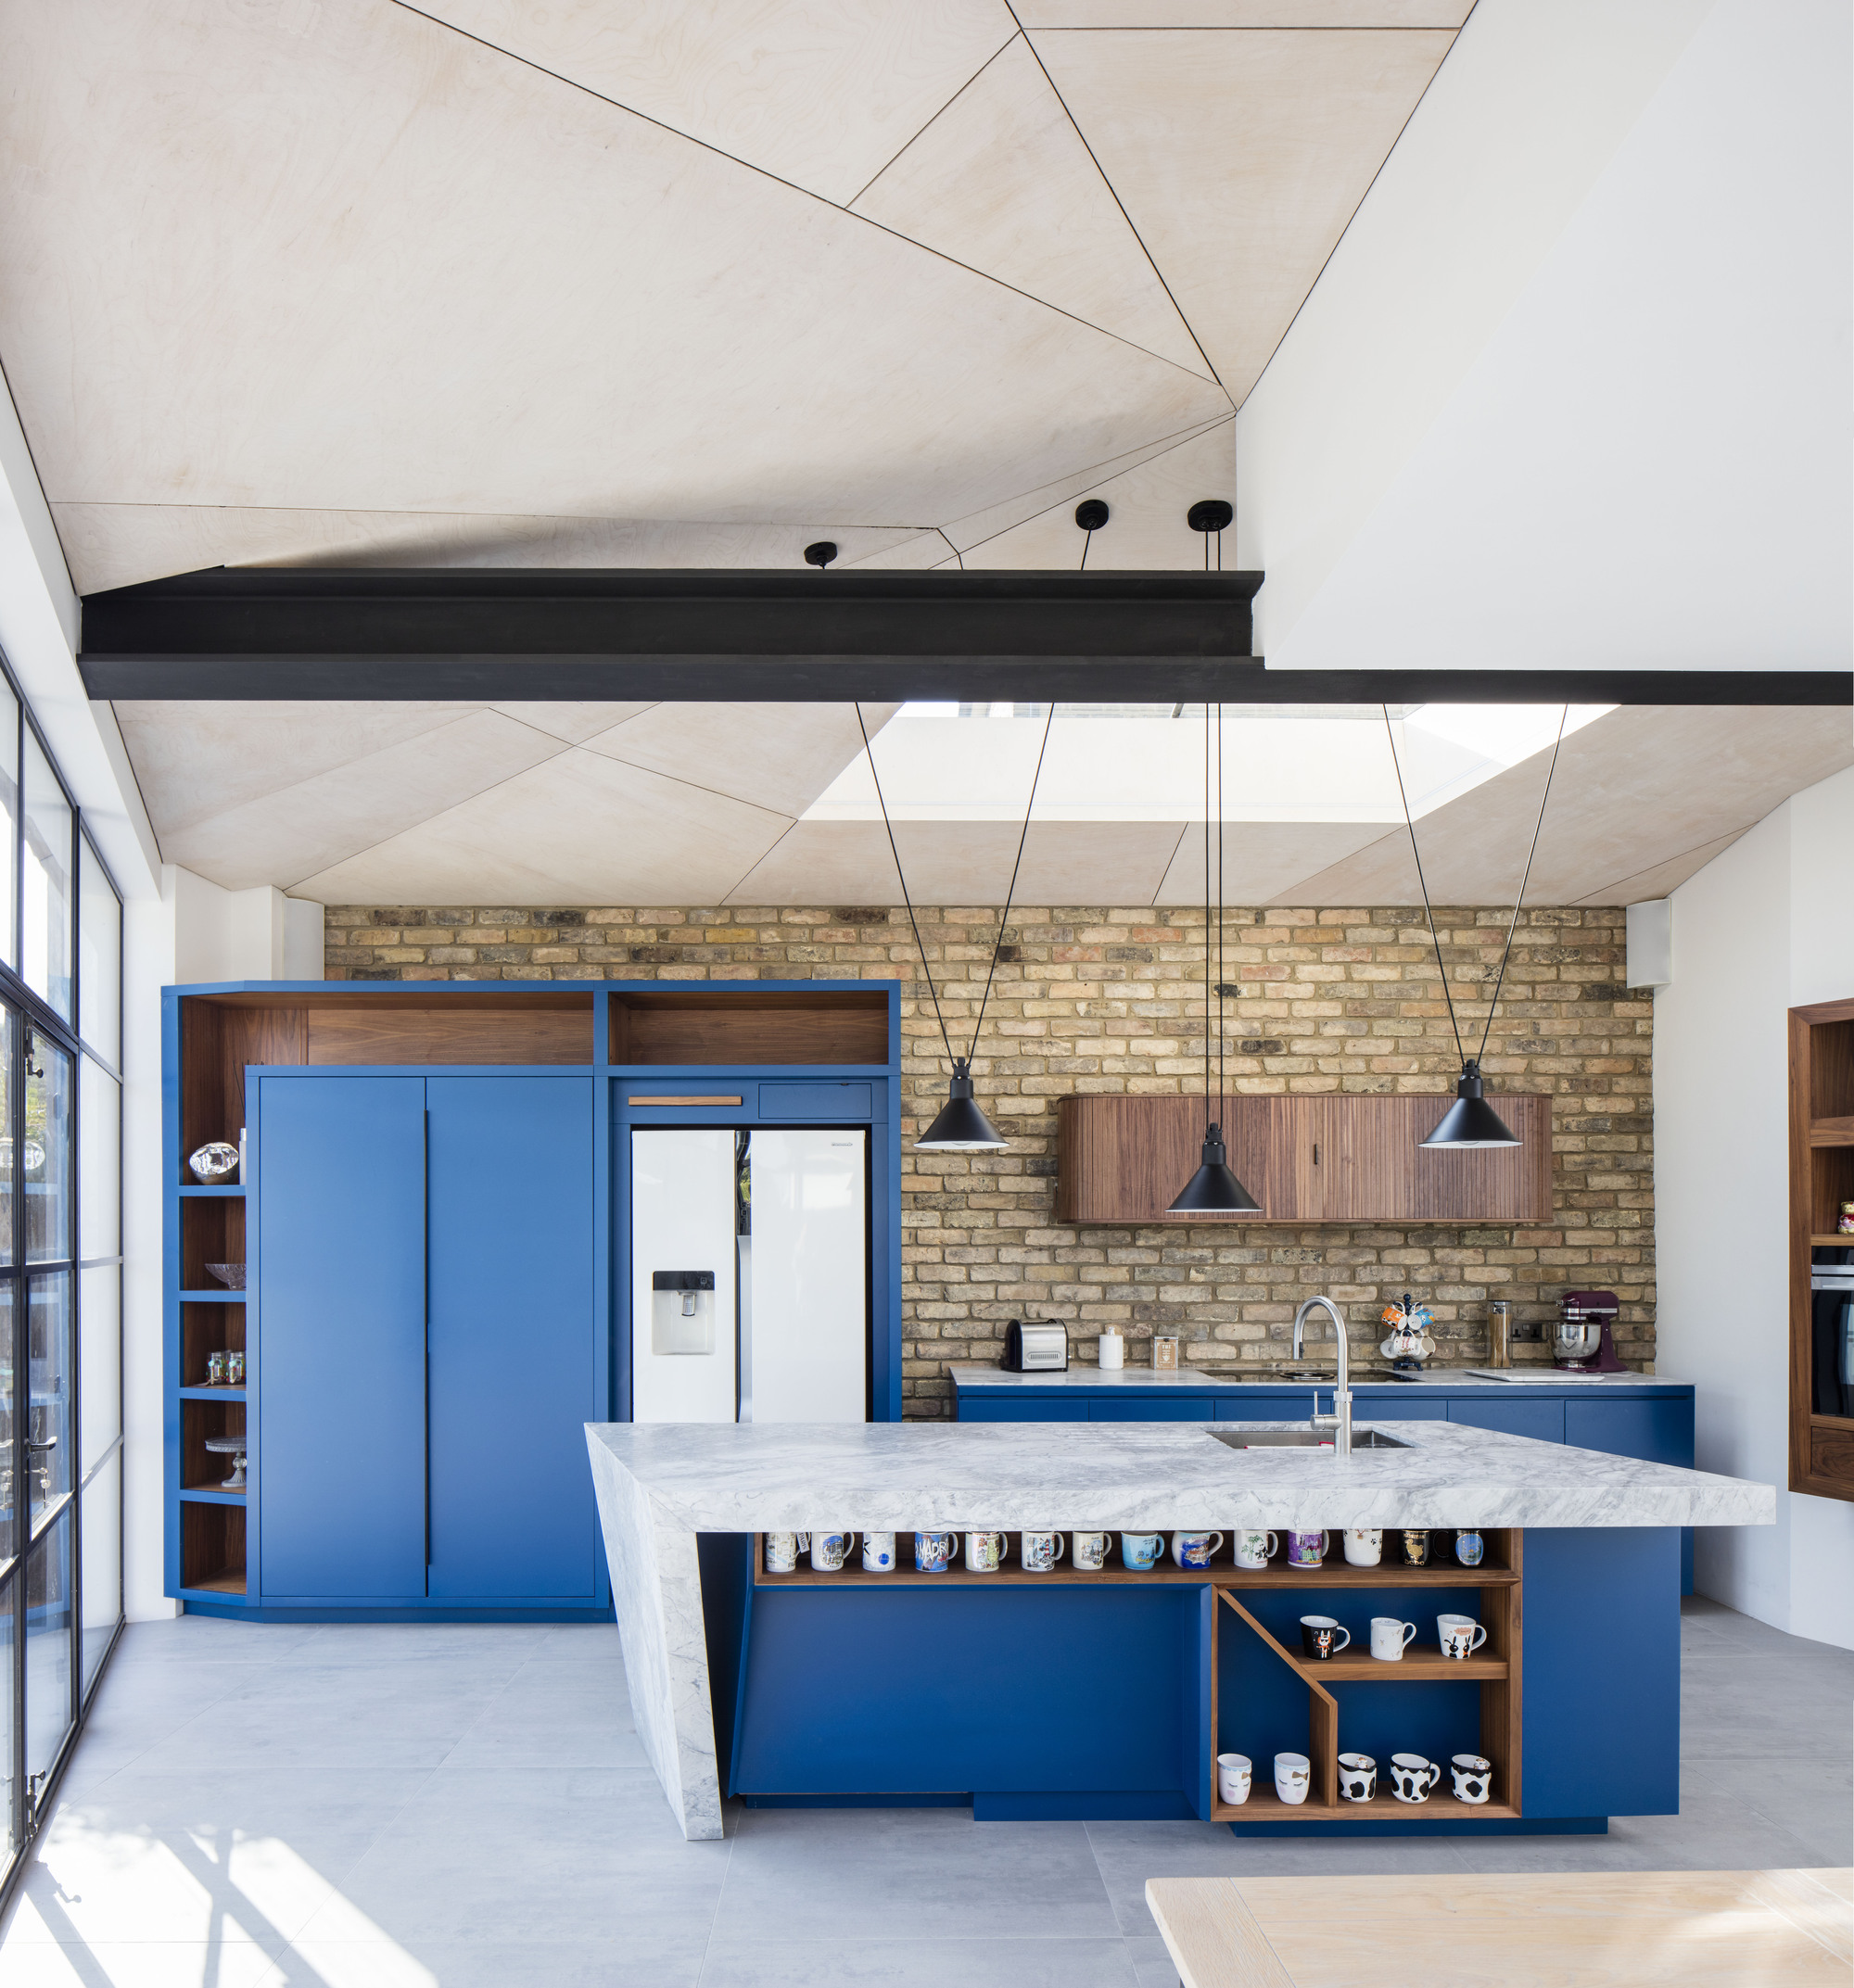 New-kitchen-of-renovated-family-home-in-London-with-brick-wall-backdrop-and-blue-cabinets-99437